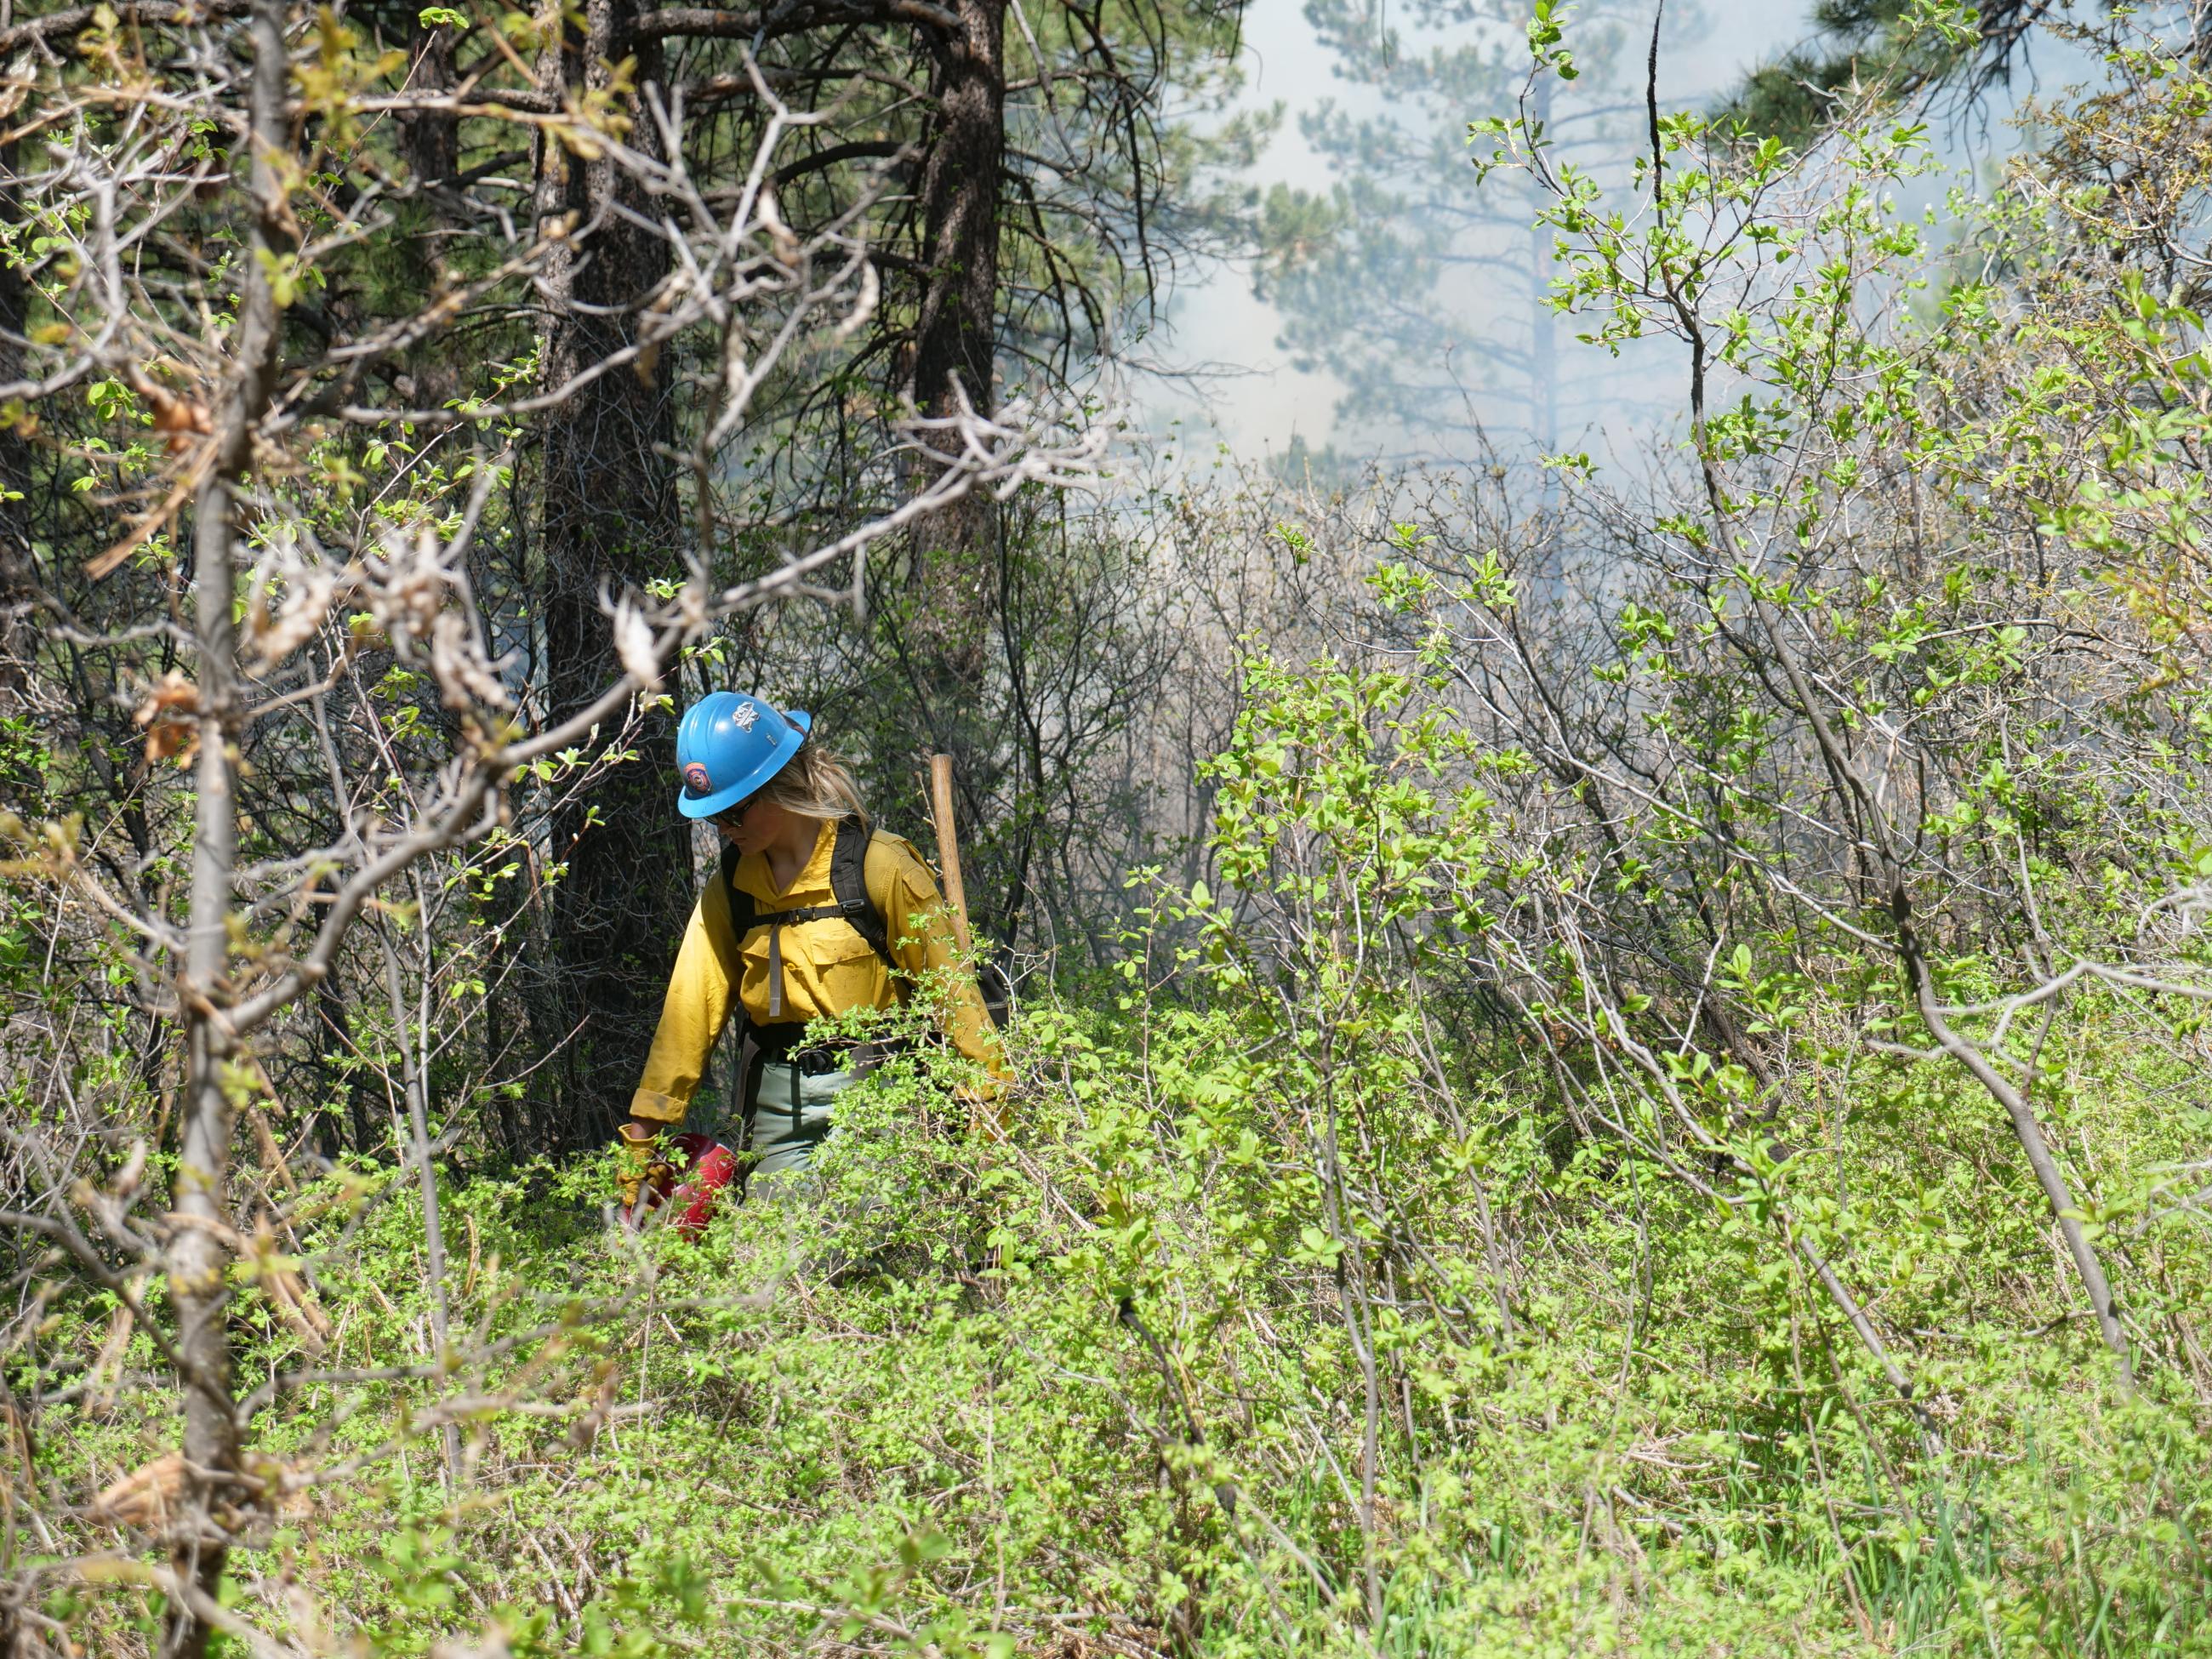 A woman firefighter in a blue helmet and yellow shirt is seen in thick brush during a prescribed fire.